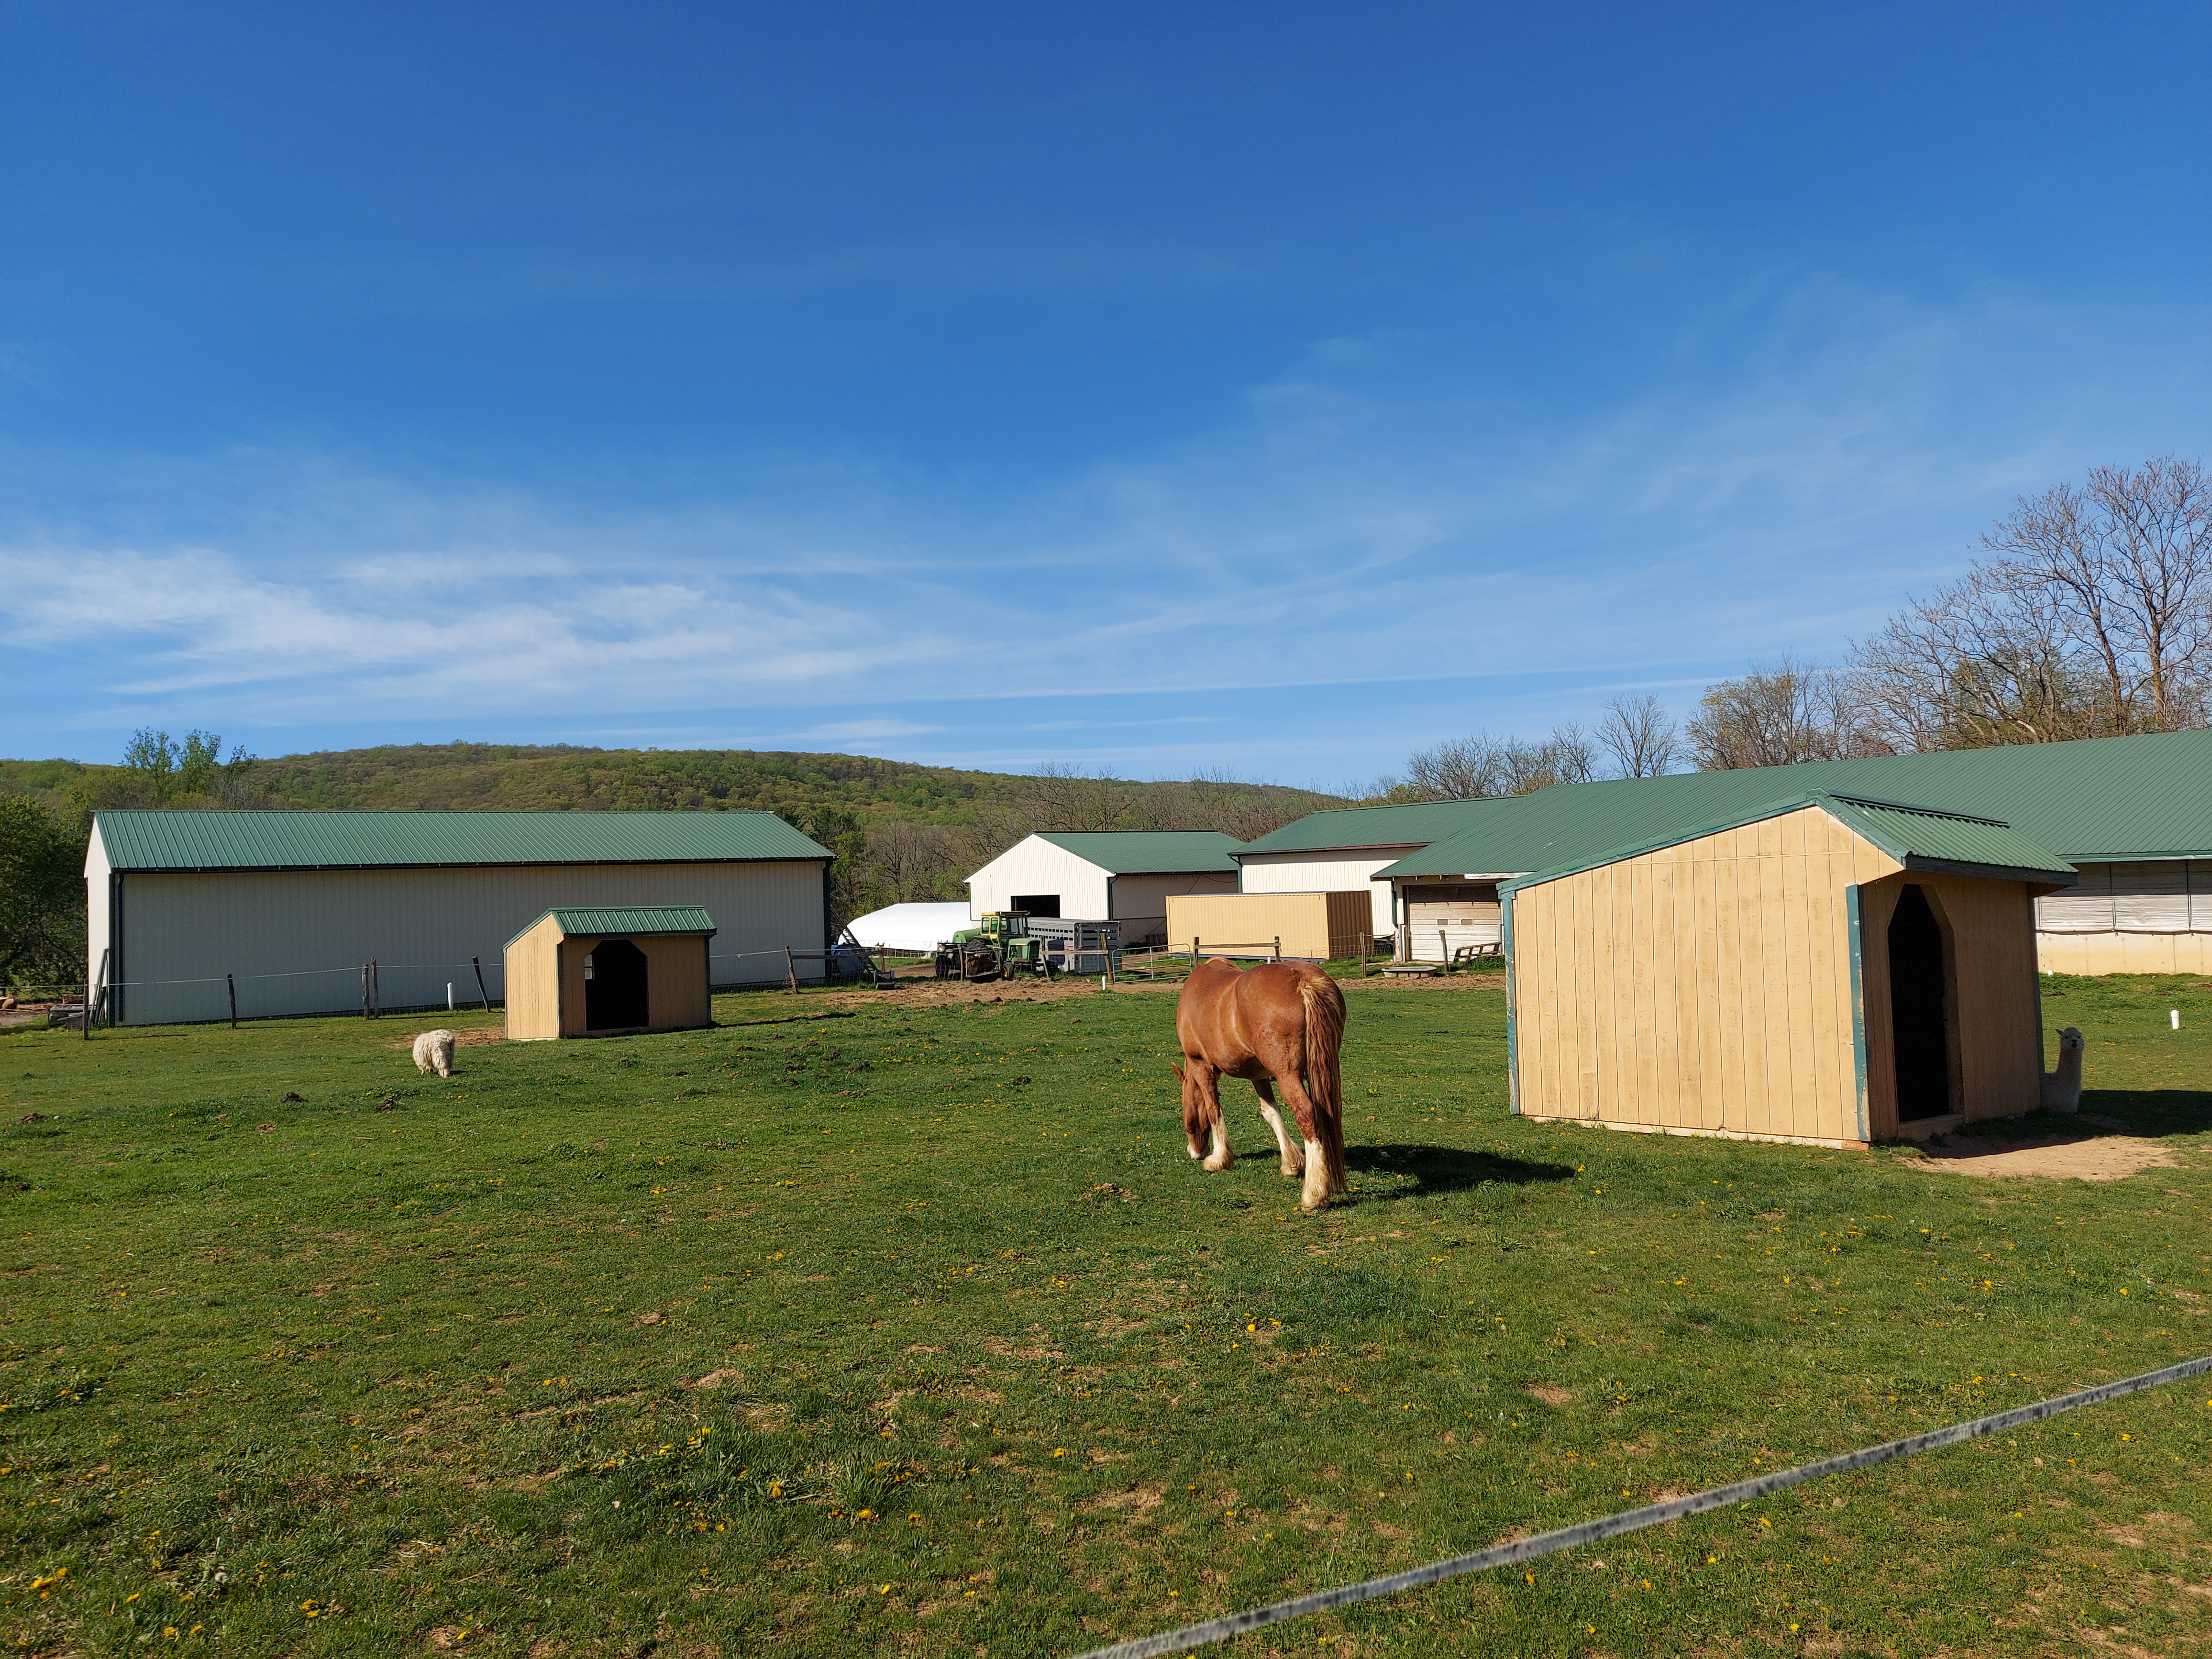 Picture of a place: Valley Shepherd Creamery